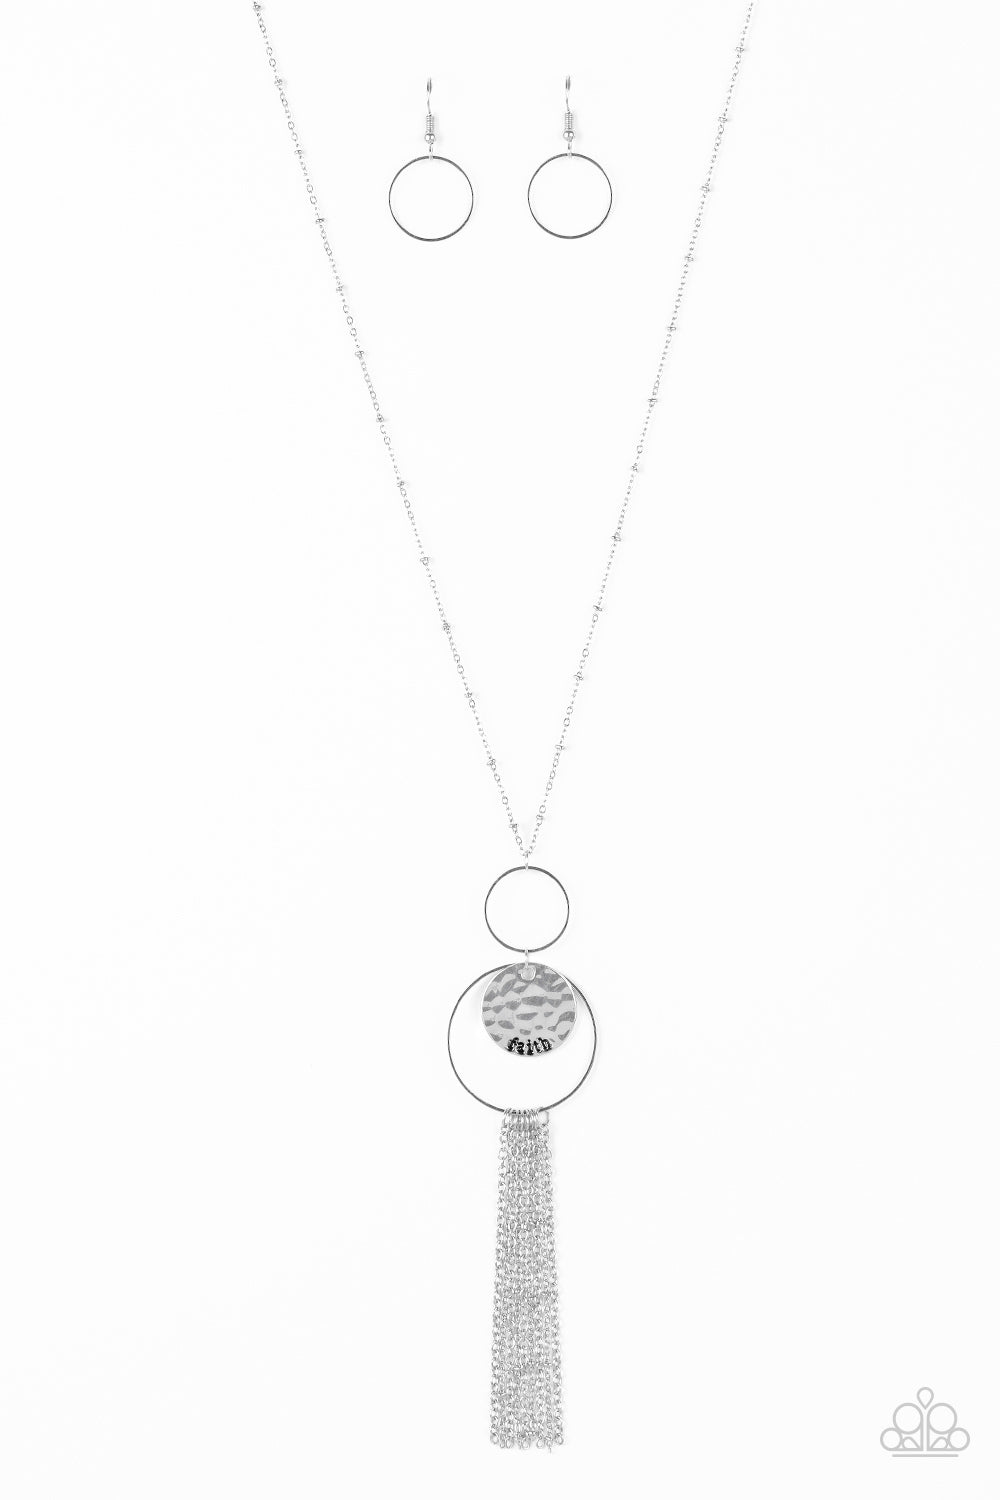 Faith Makes All Things Possible Silver Necklace